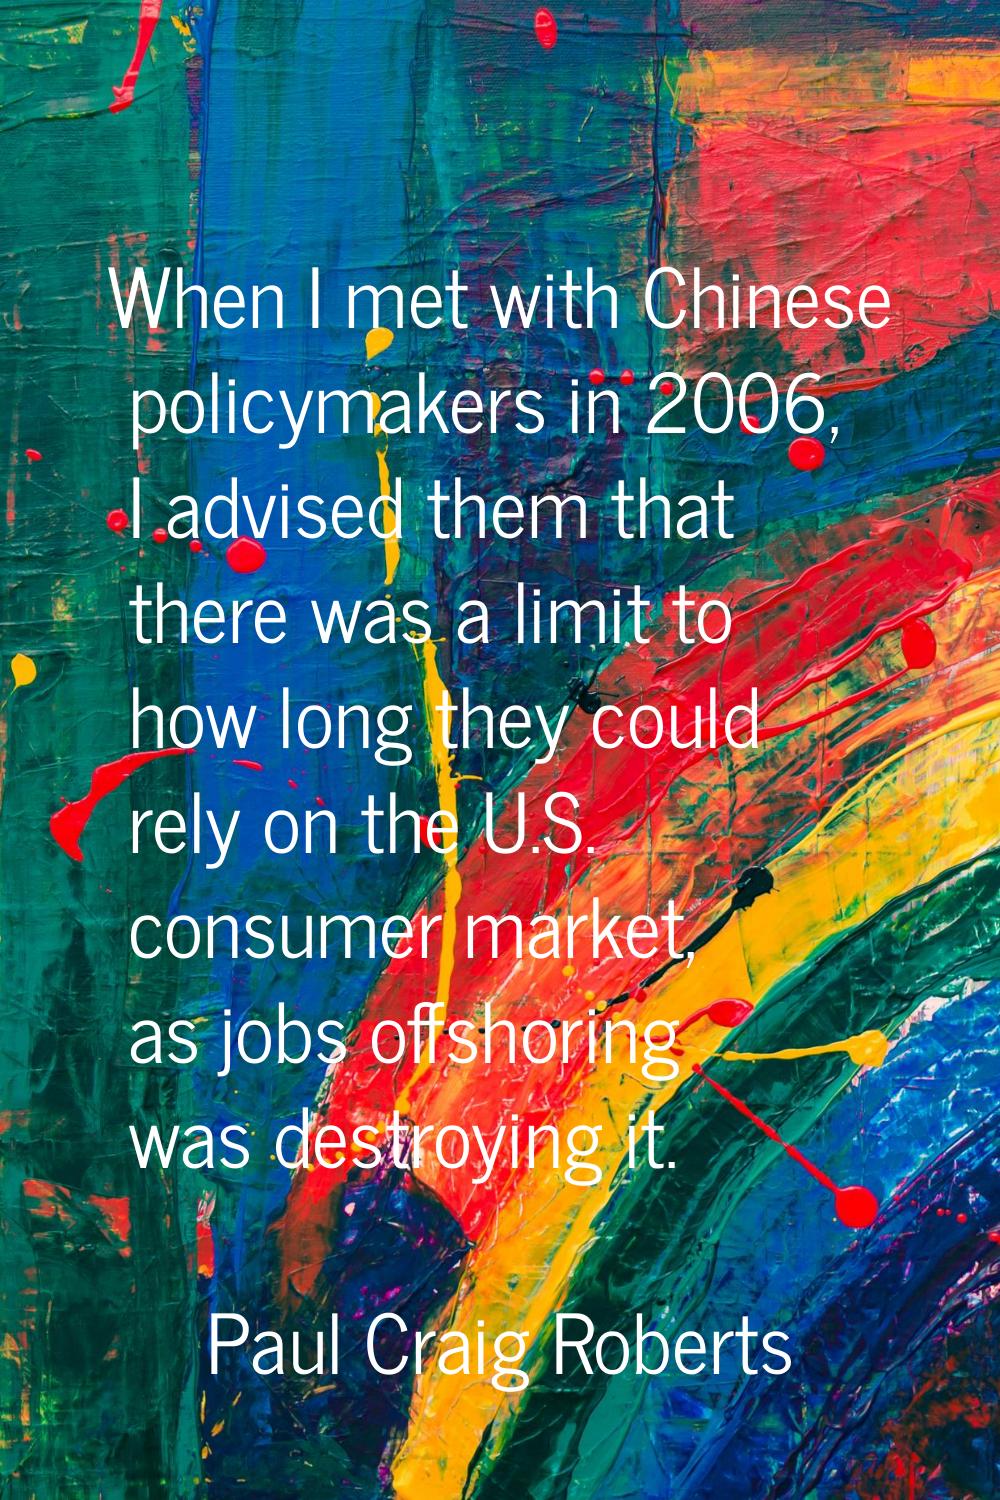 When I met with Chinese policymakers in 2006, I advised them that there was a limit to how long the